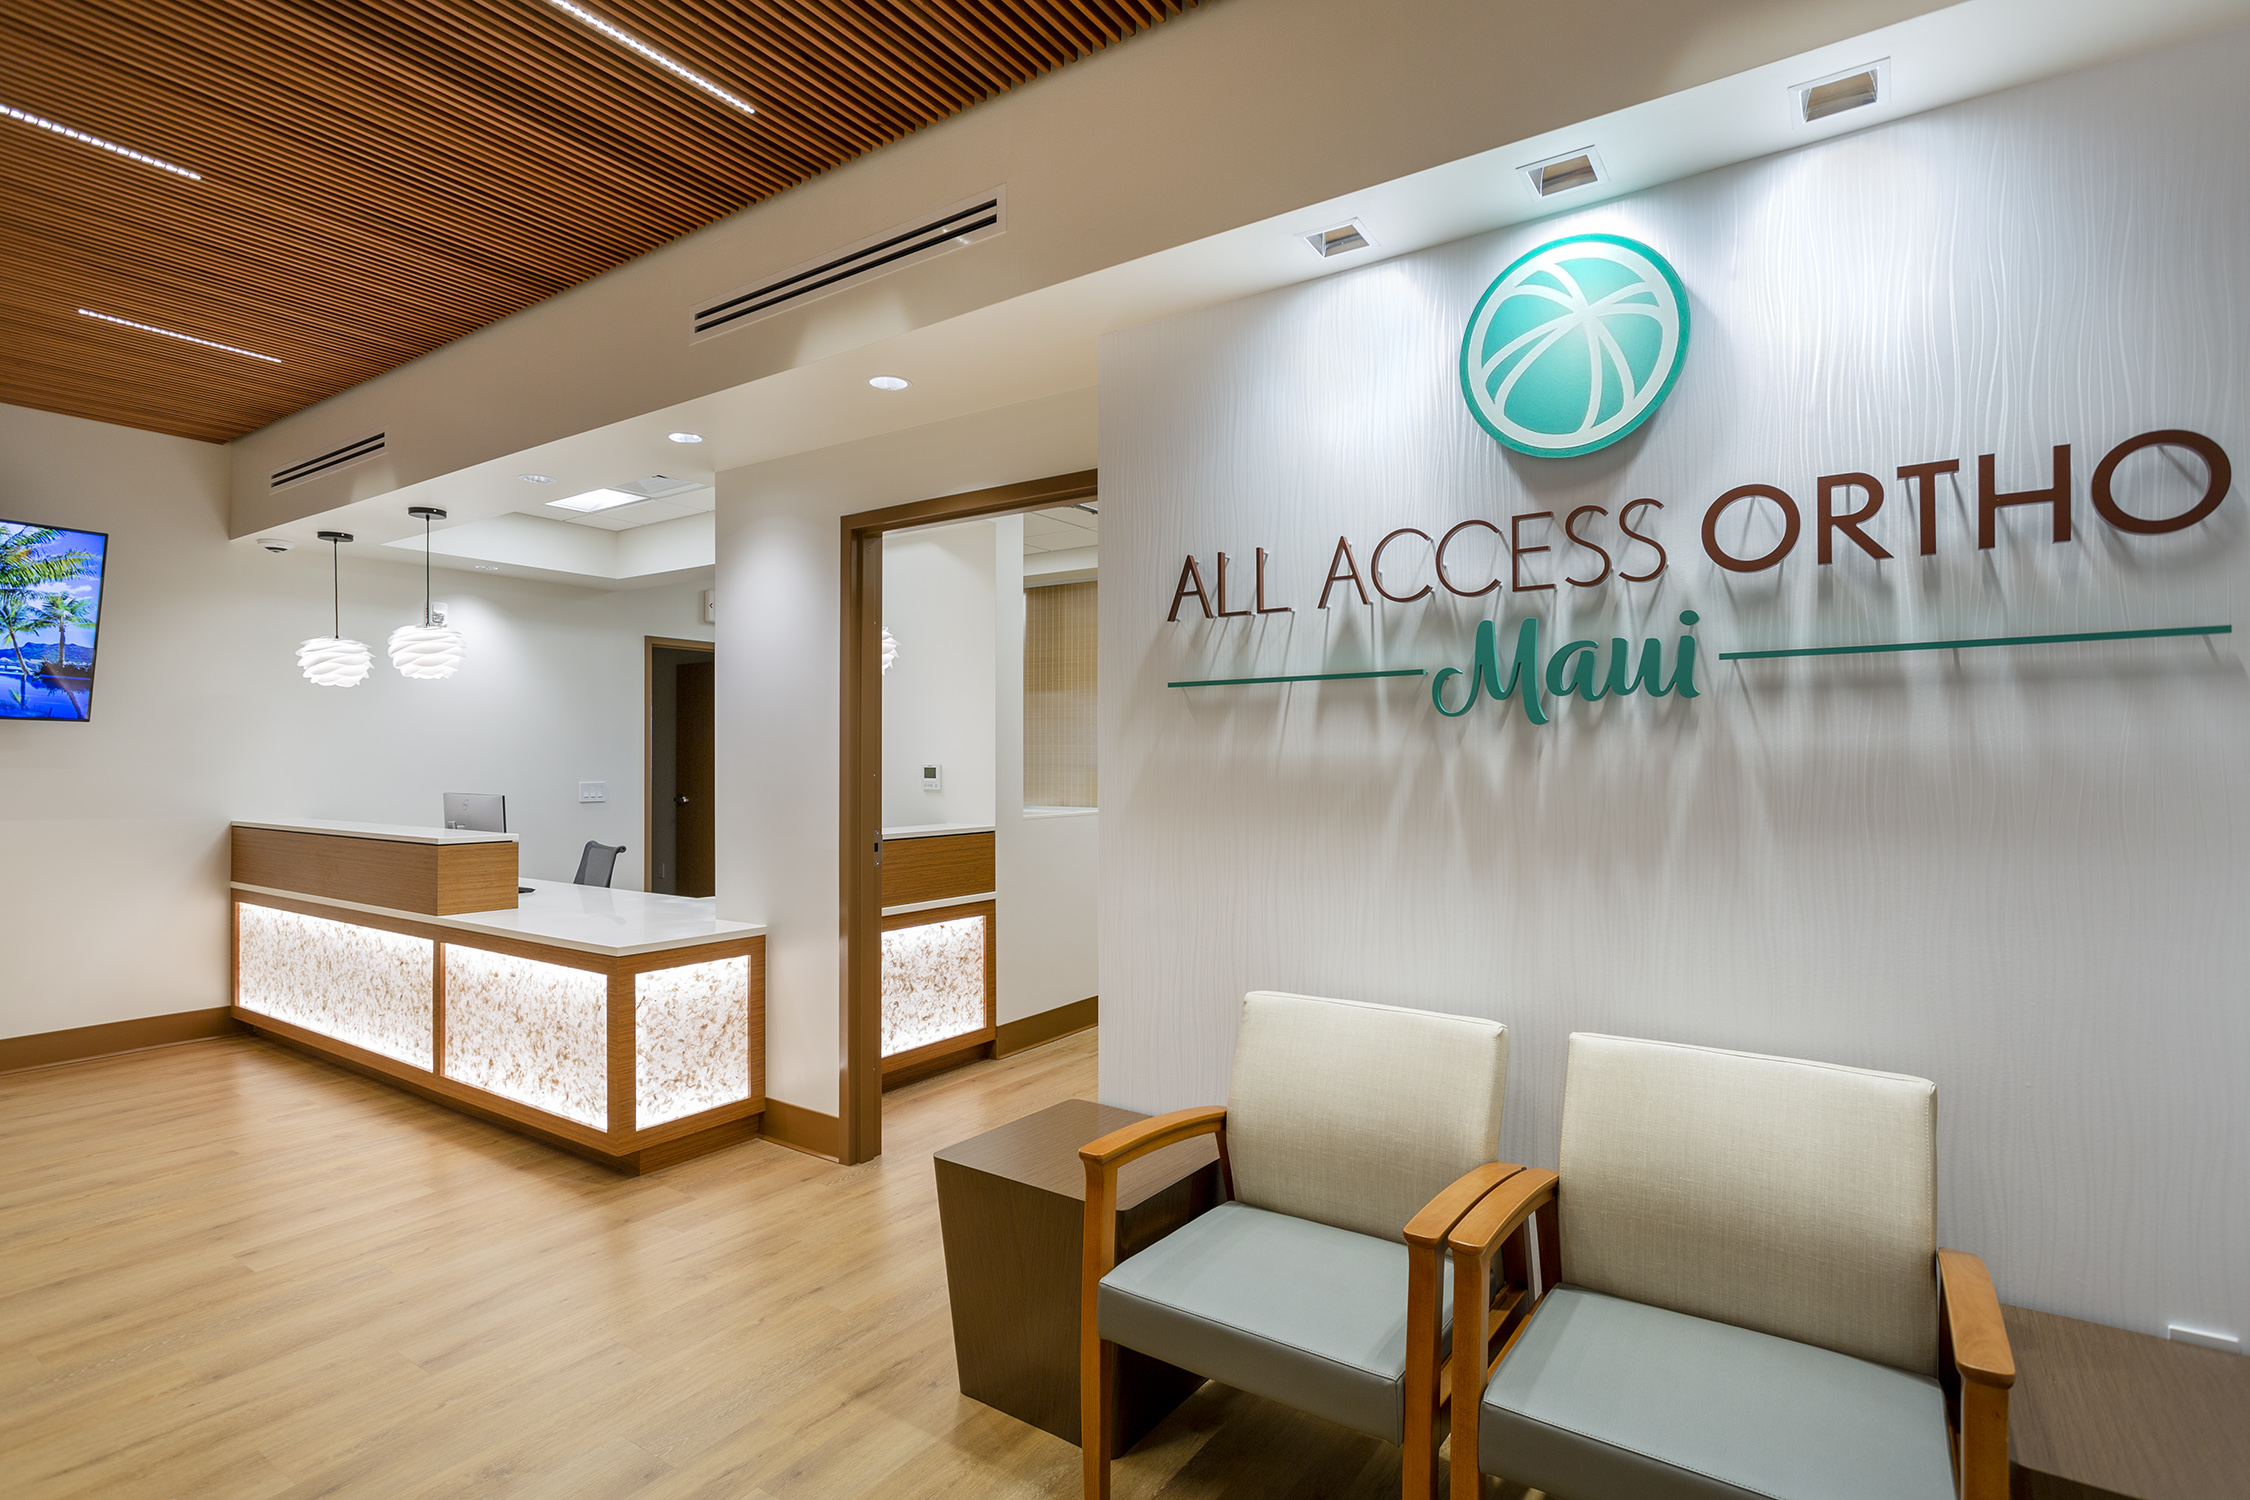 All Access Ortho (AAO) in Kula, Maui is open and ready for business! One of KYA's most recent projects on Maui.